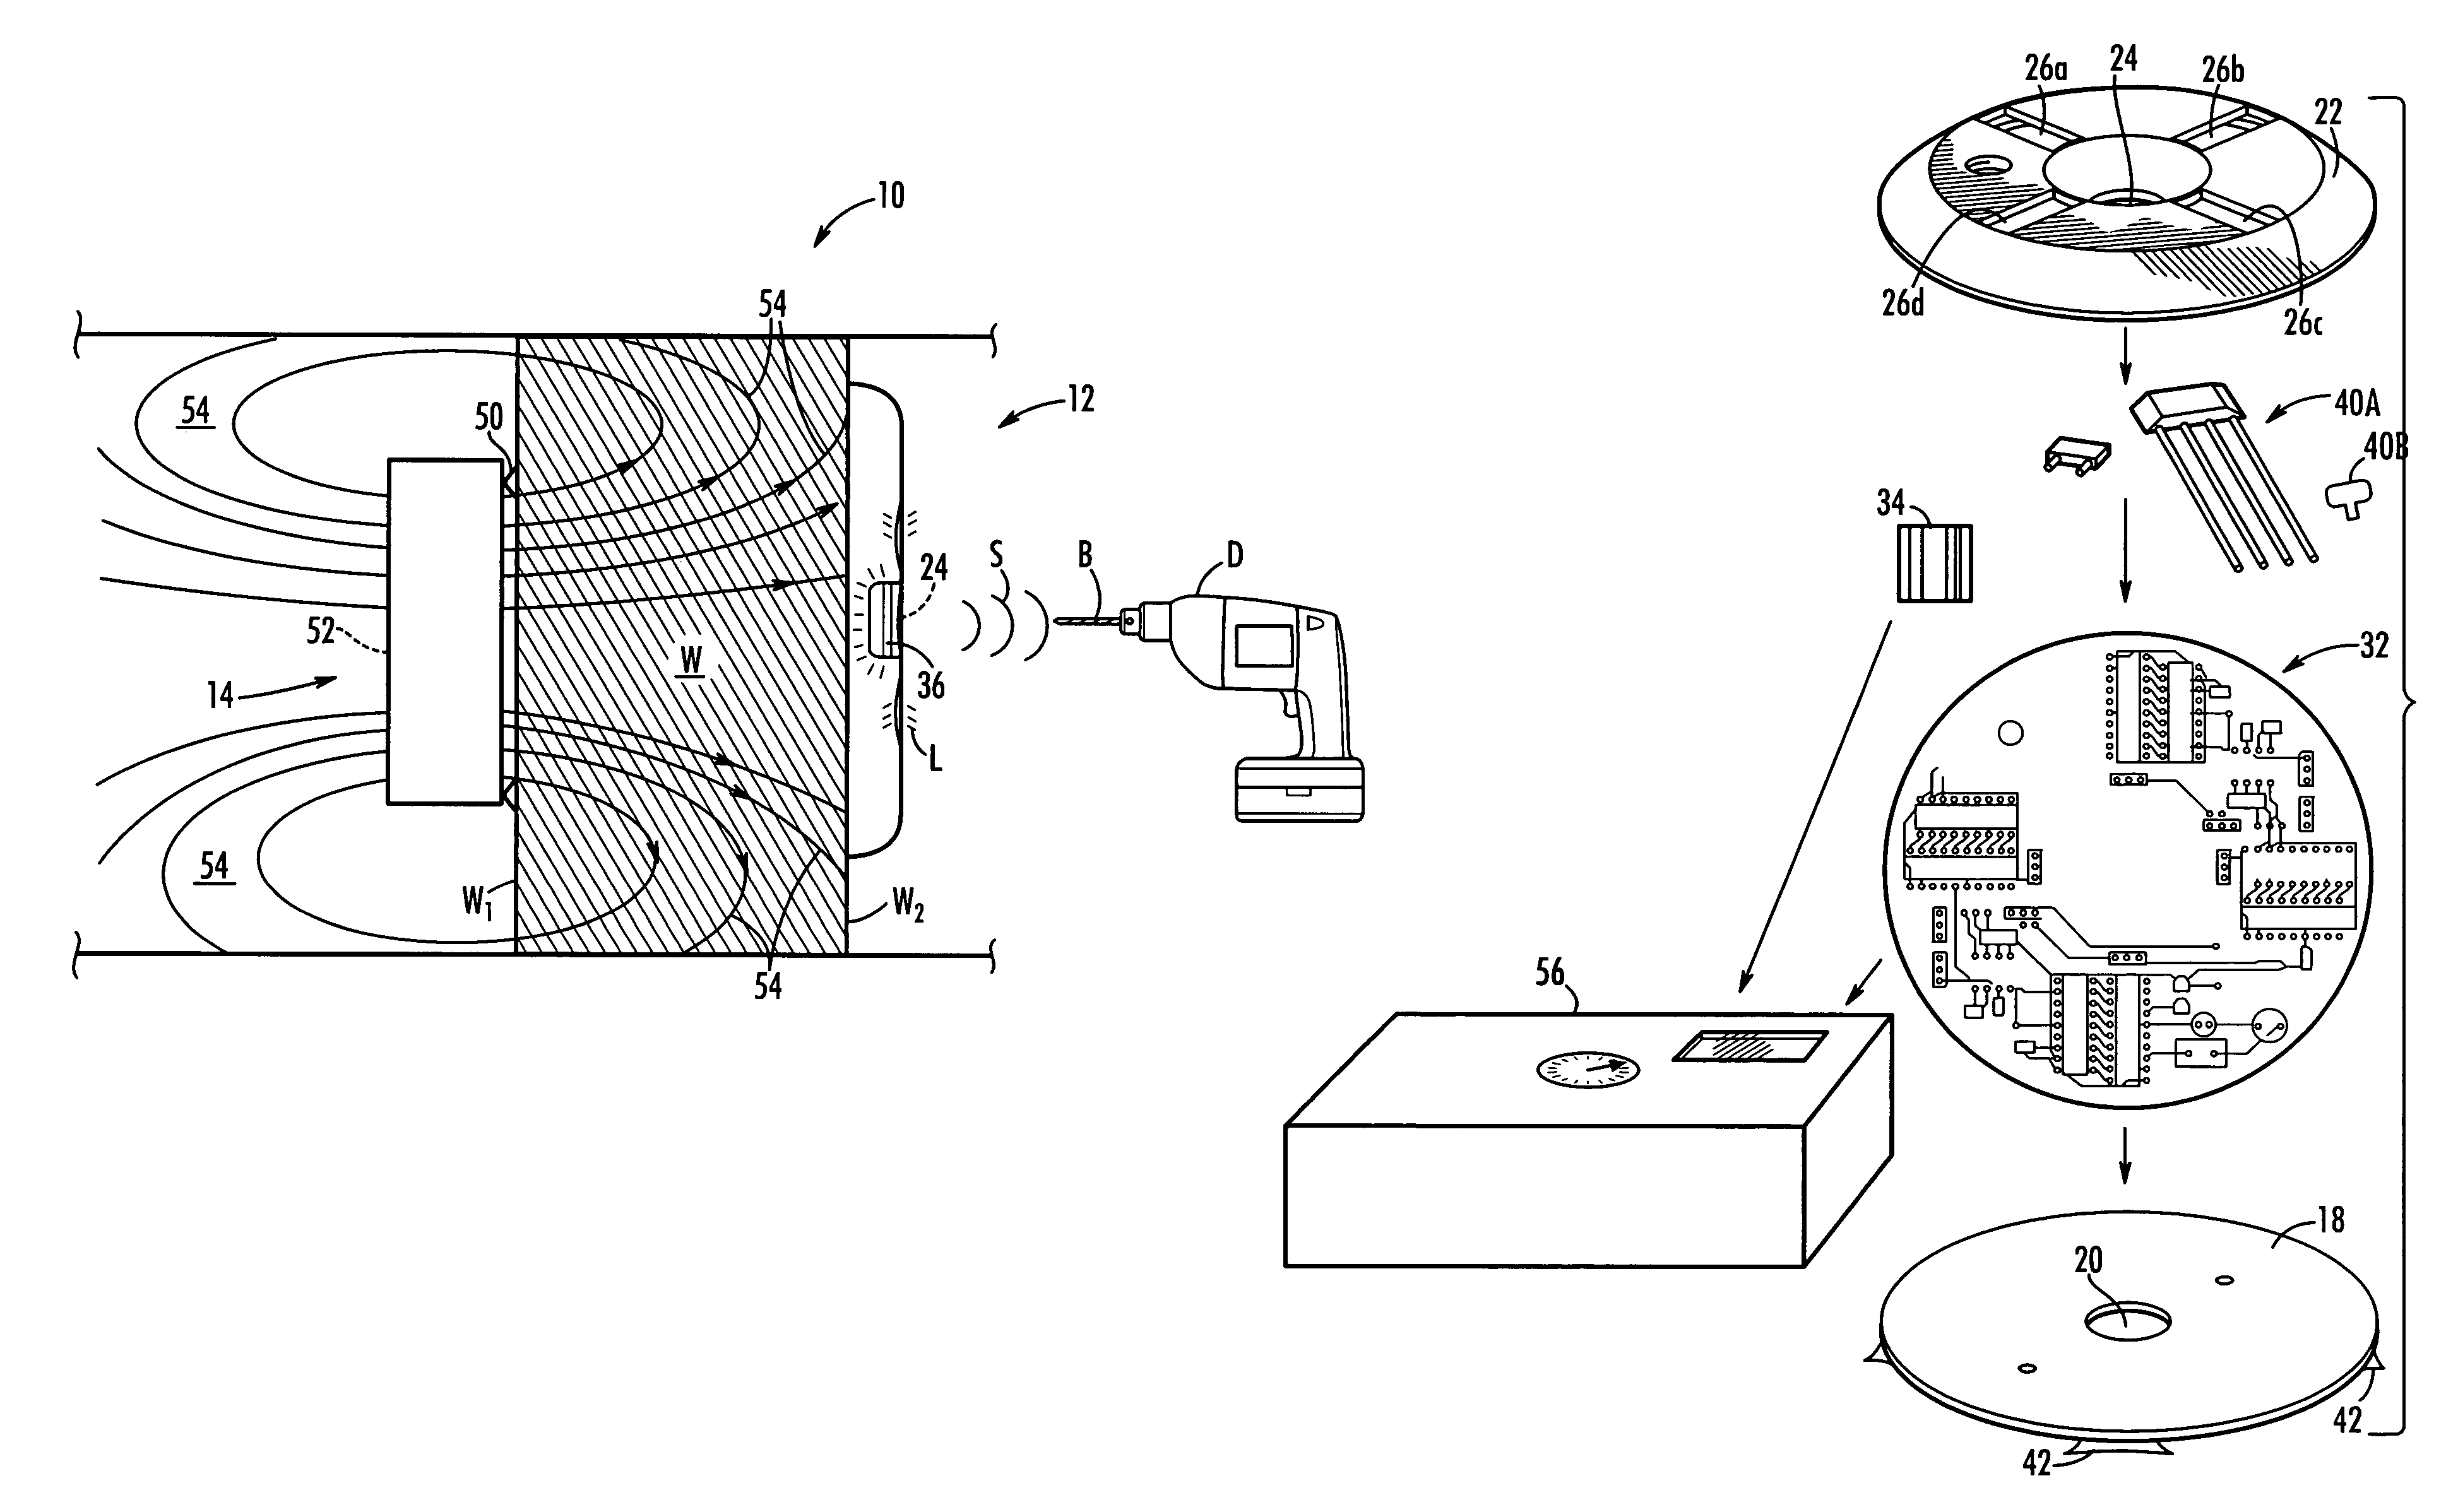 Device for establishing a cutting point from a blind side of a structure